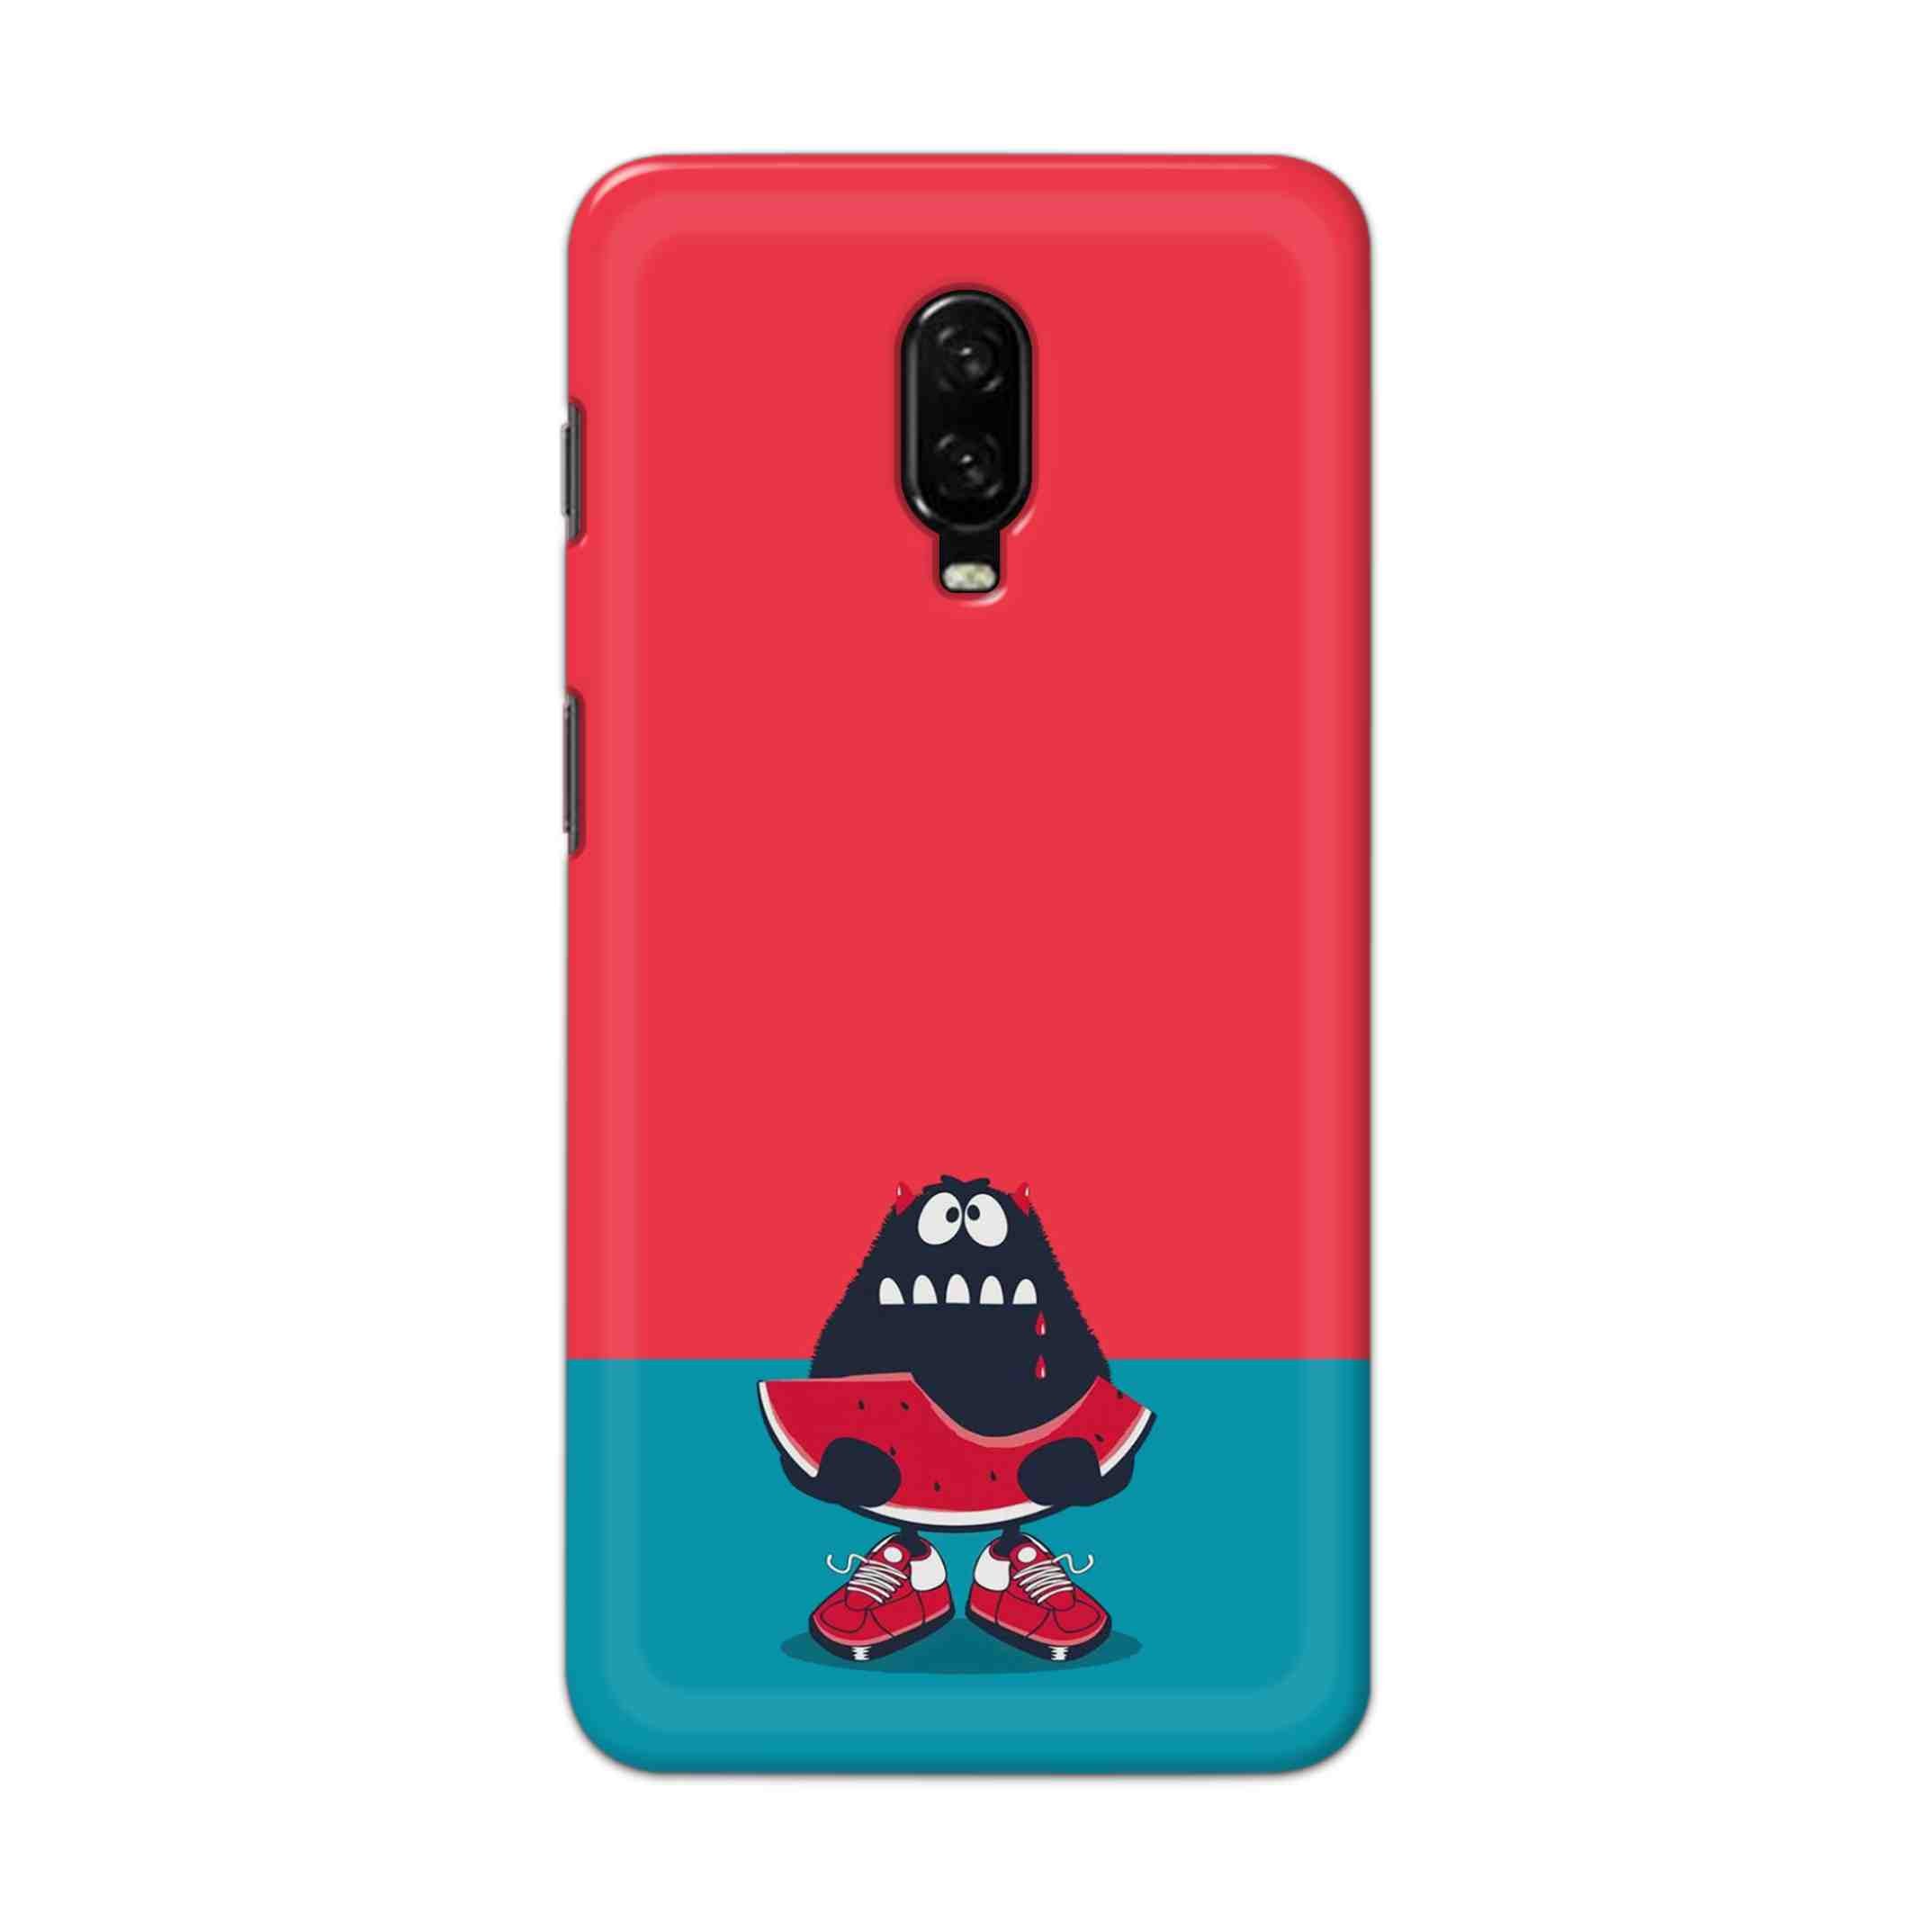 Buy Watermelon Hard Back Mobile Phone Case Cover For OnePlus 6T Online